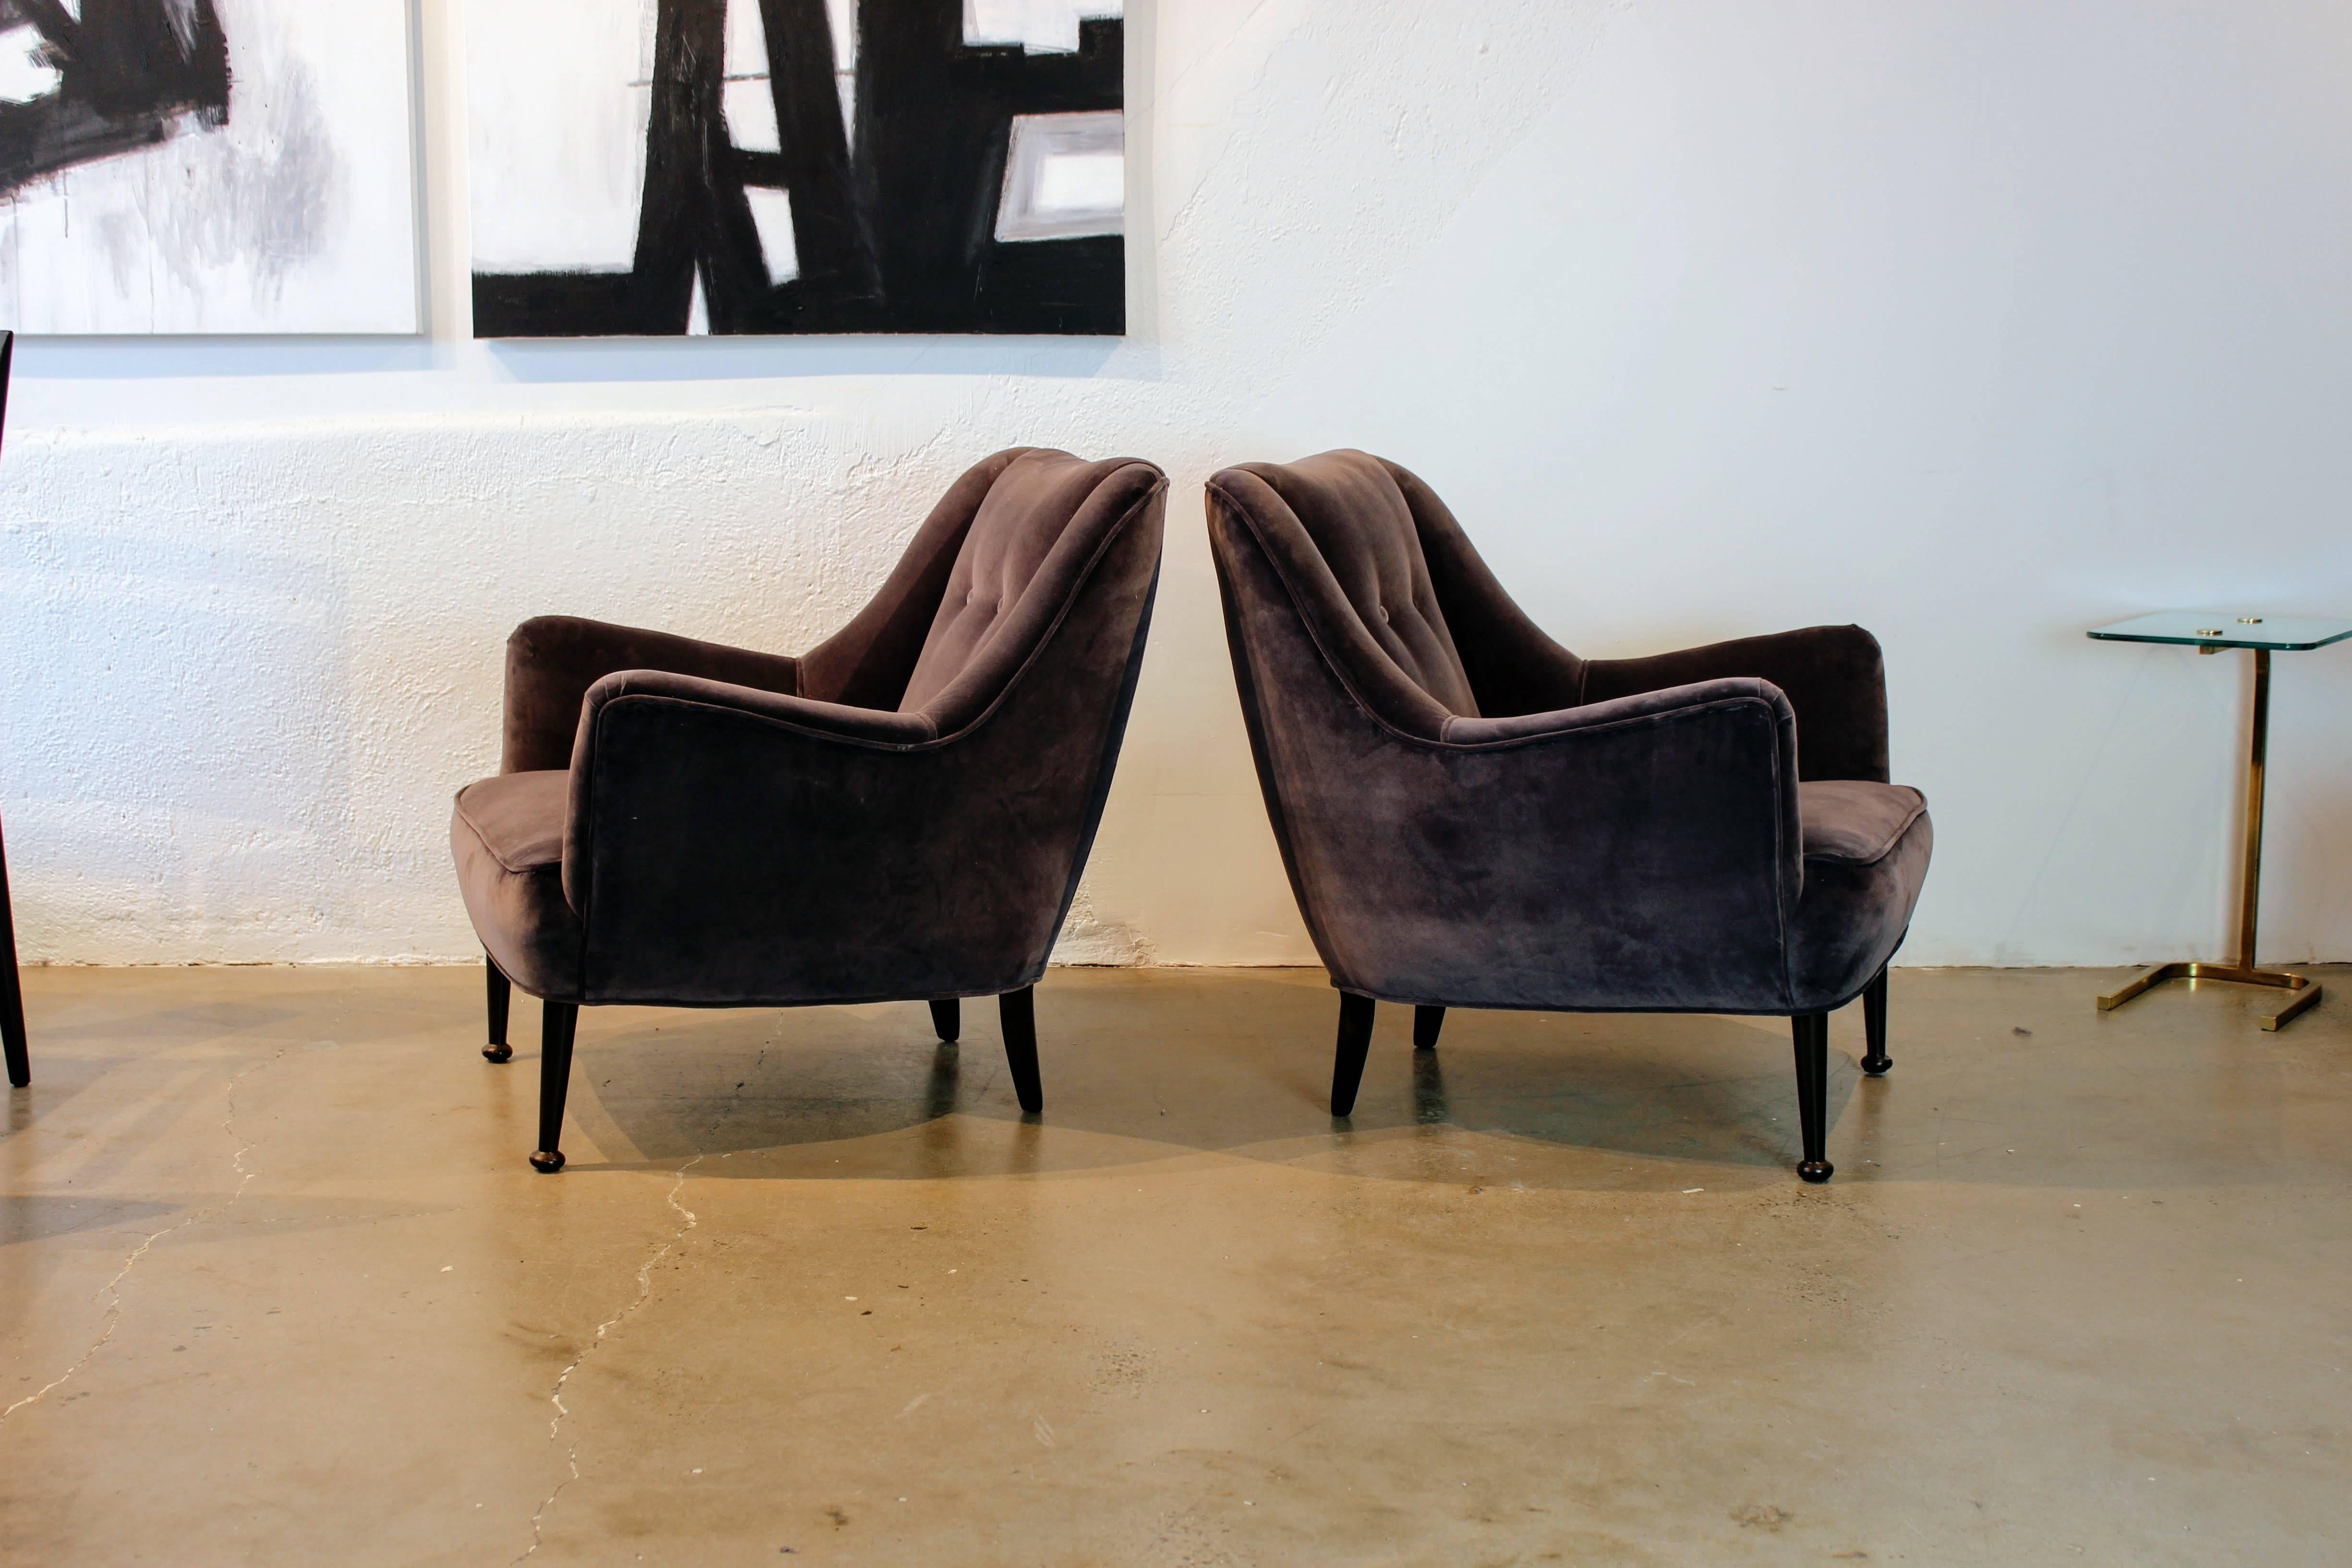 Pair of Gorgeous Mid-Century Modern lounge chairs in deep gray lilac velvet with sculptural walnut legs. Very comfortable and well made. The origin is unknown but they have both Danish and Italian modern characteristics. Fully restored and in